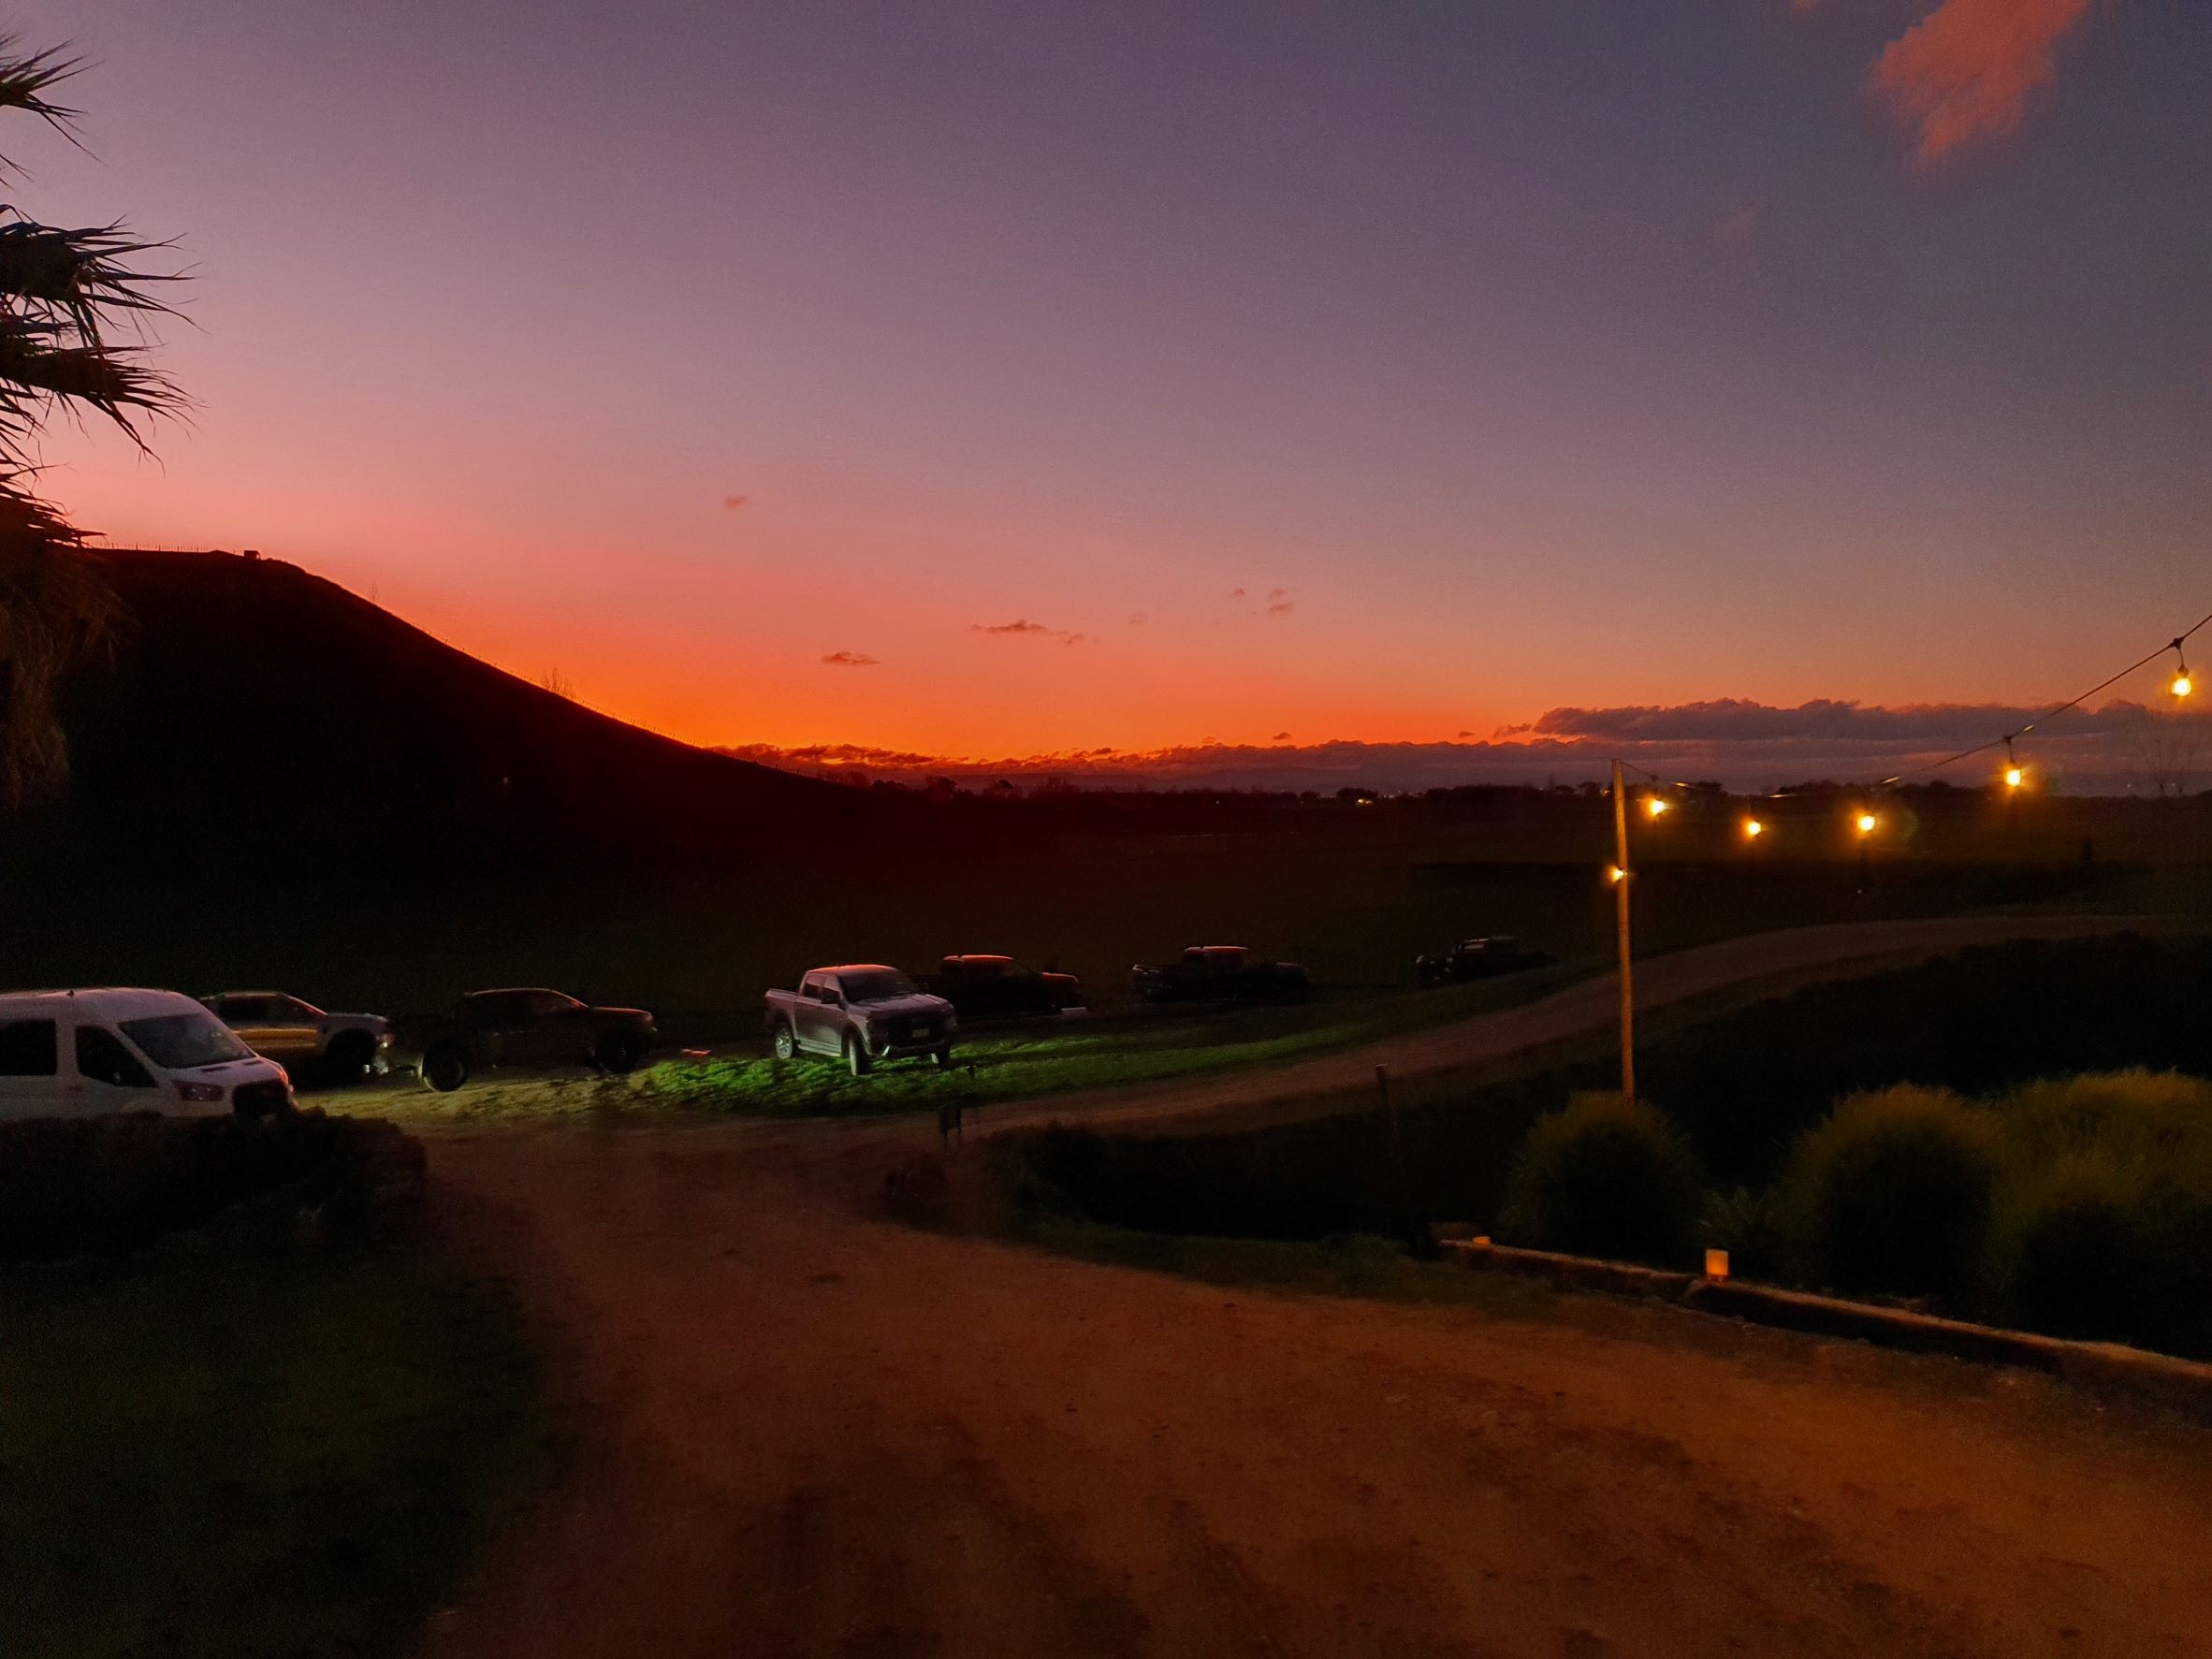 Sunset over the hills at Outfoxed, Havelock North, New Zealand